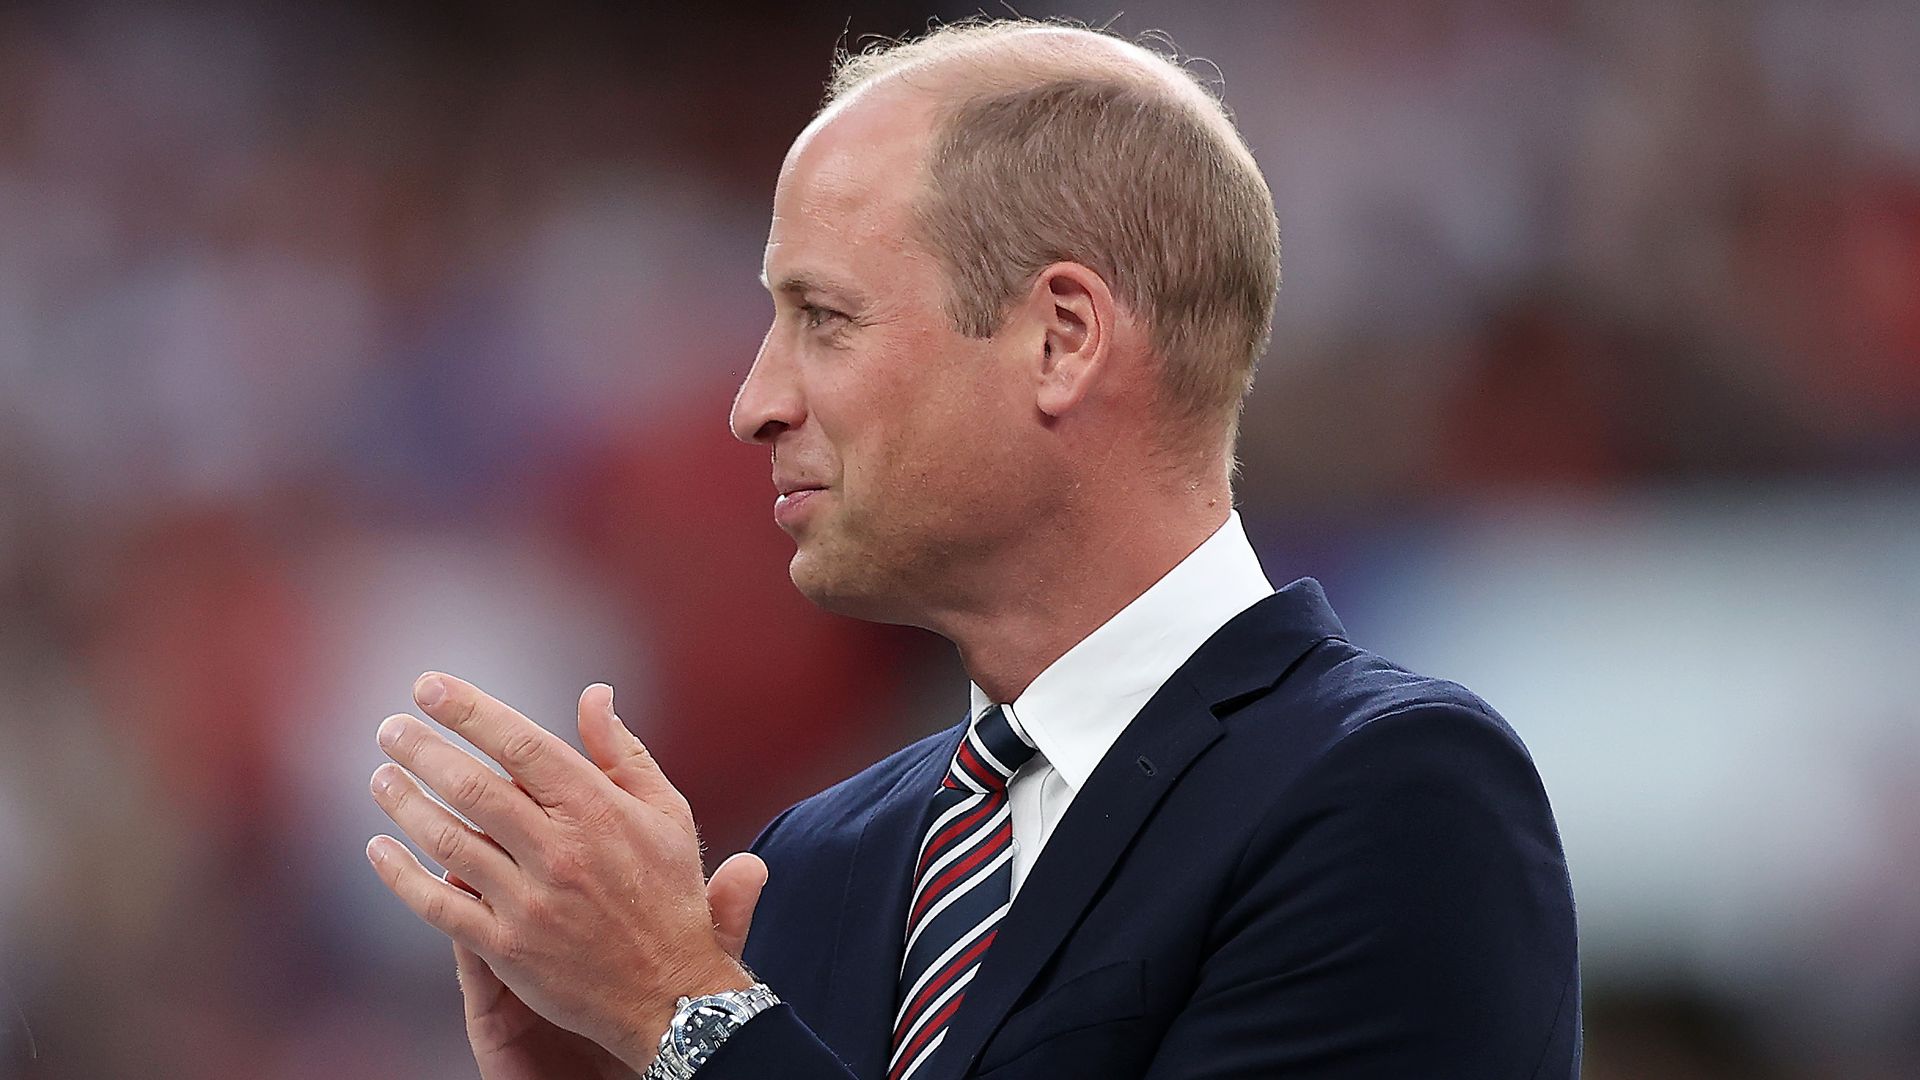 Prince William at Euro 2022 final